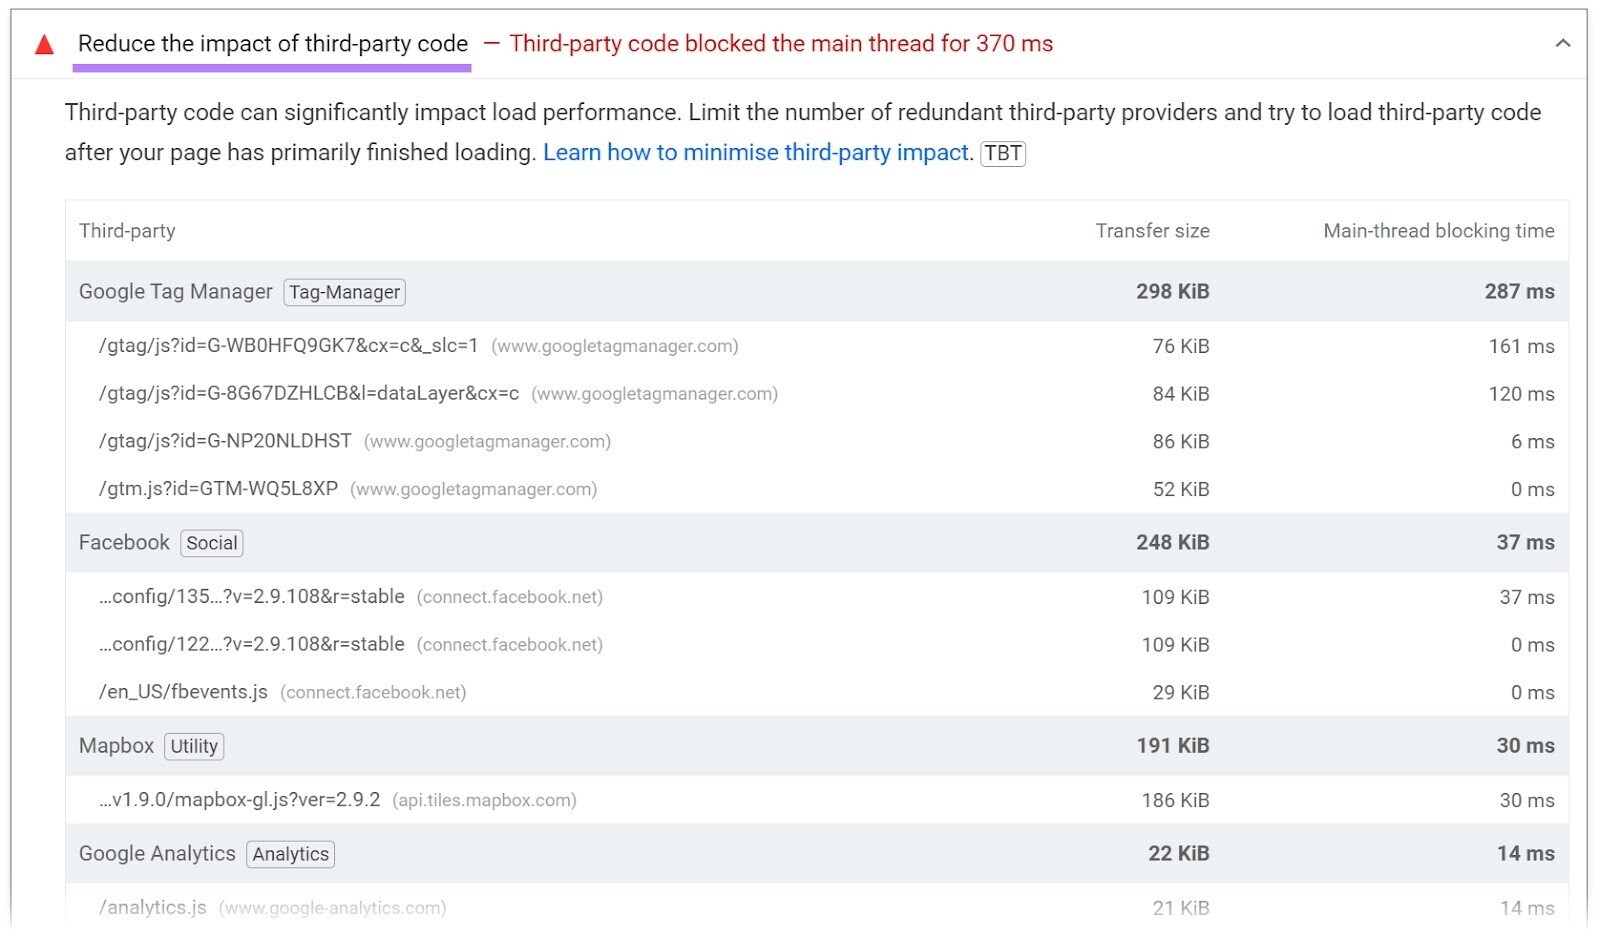 "Reduce the impact of third-party code" page